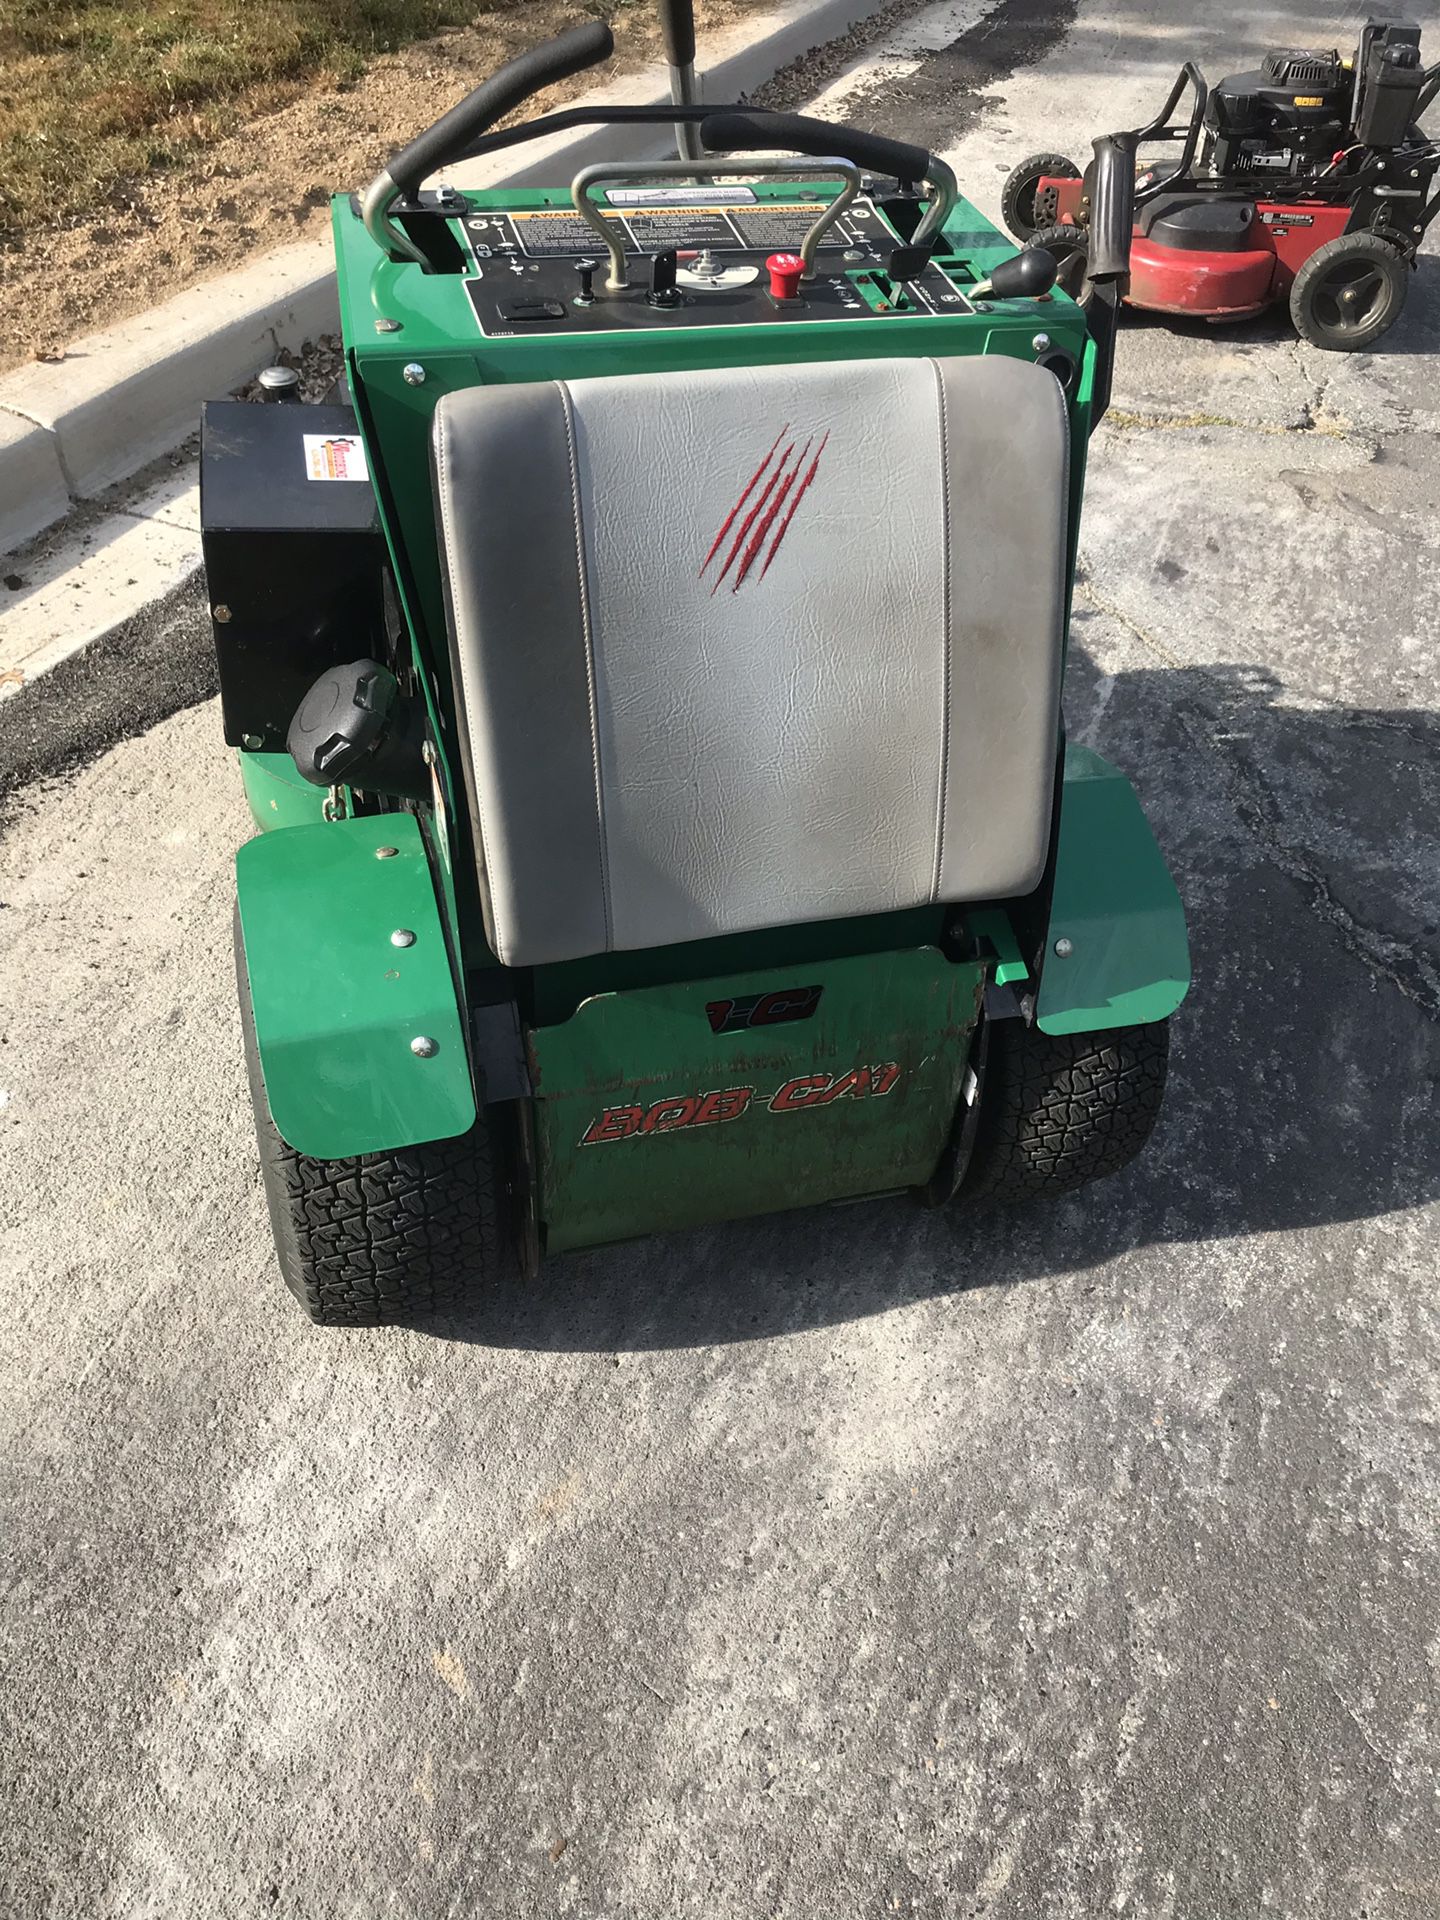 Bobcat Quickat 36” stand on mower